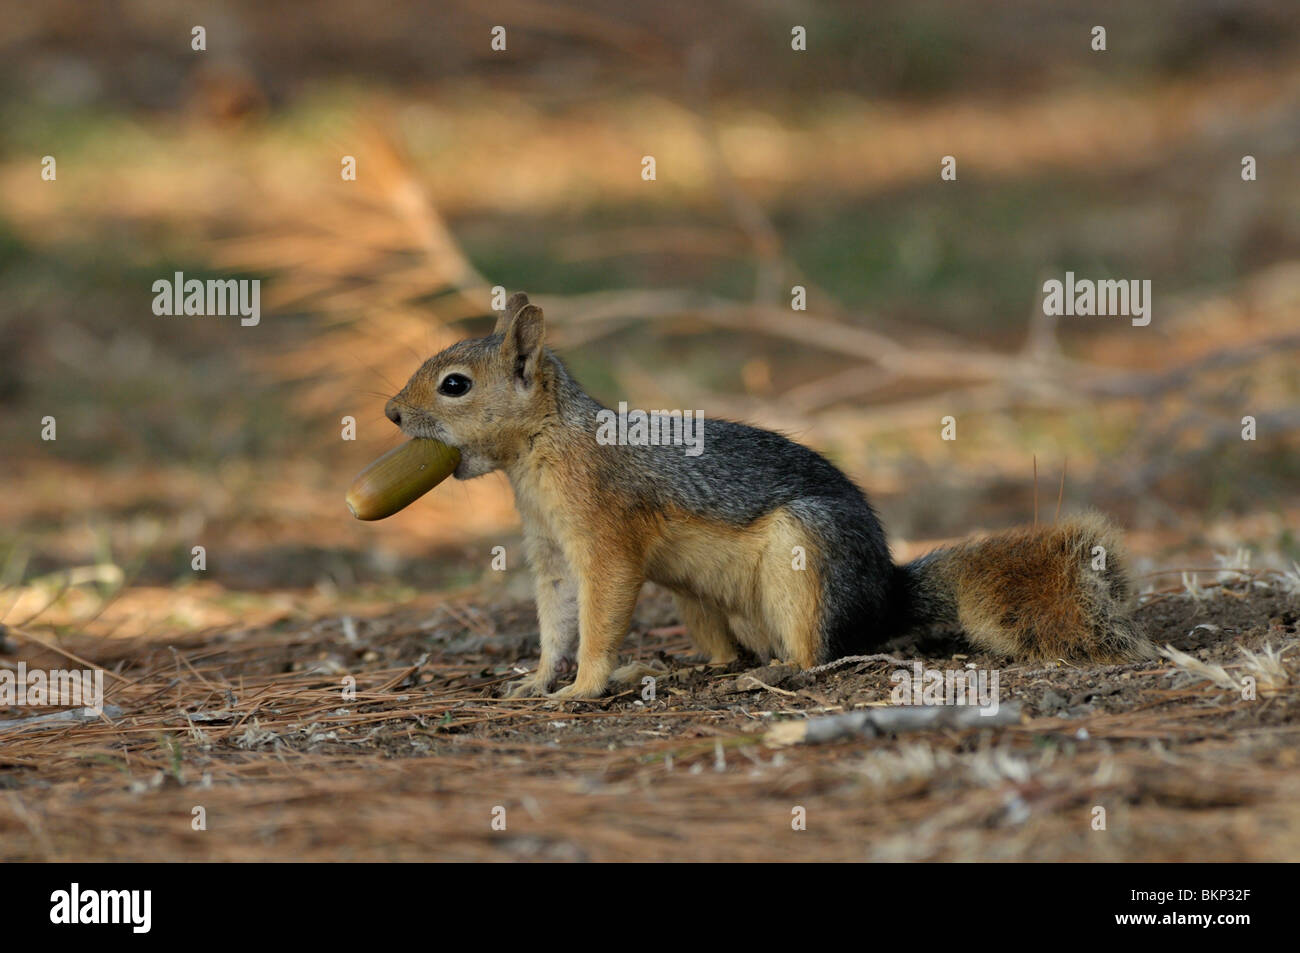 persian squirrel with an acorn Stock Photo